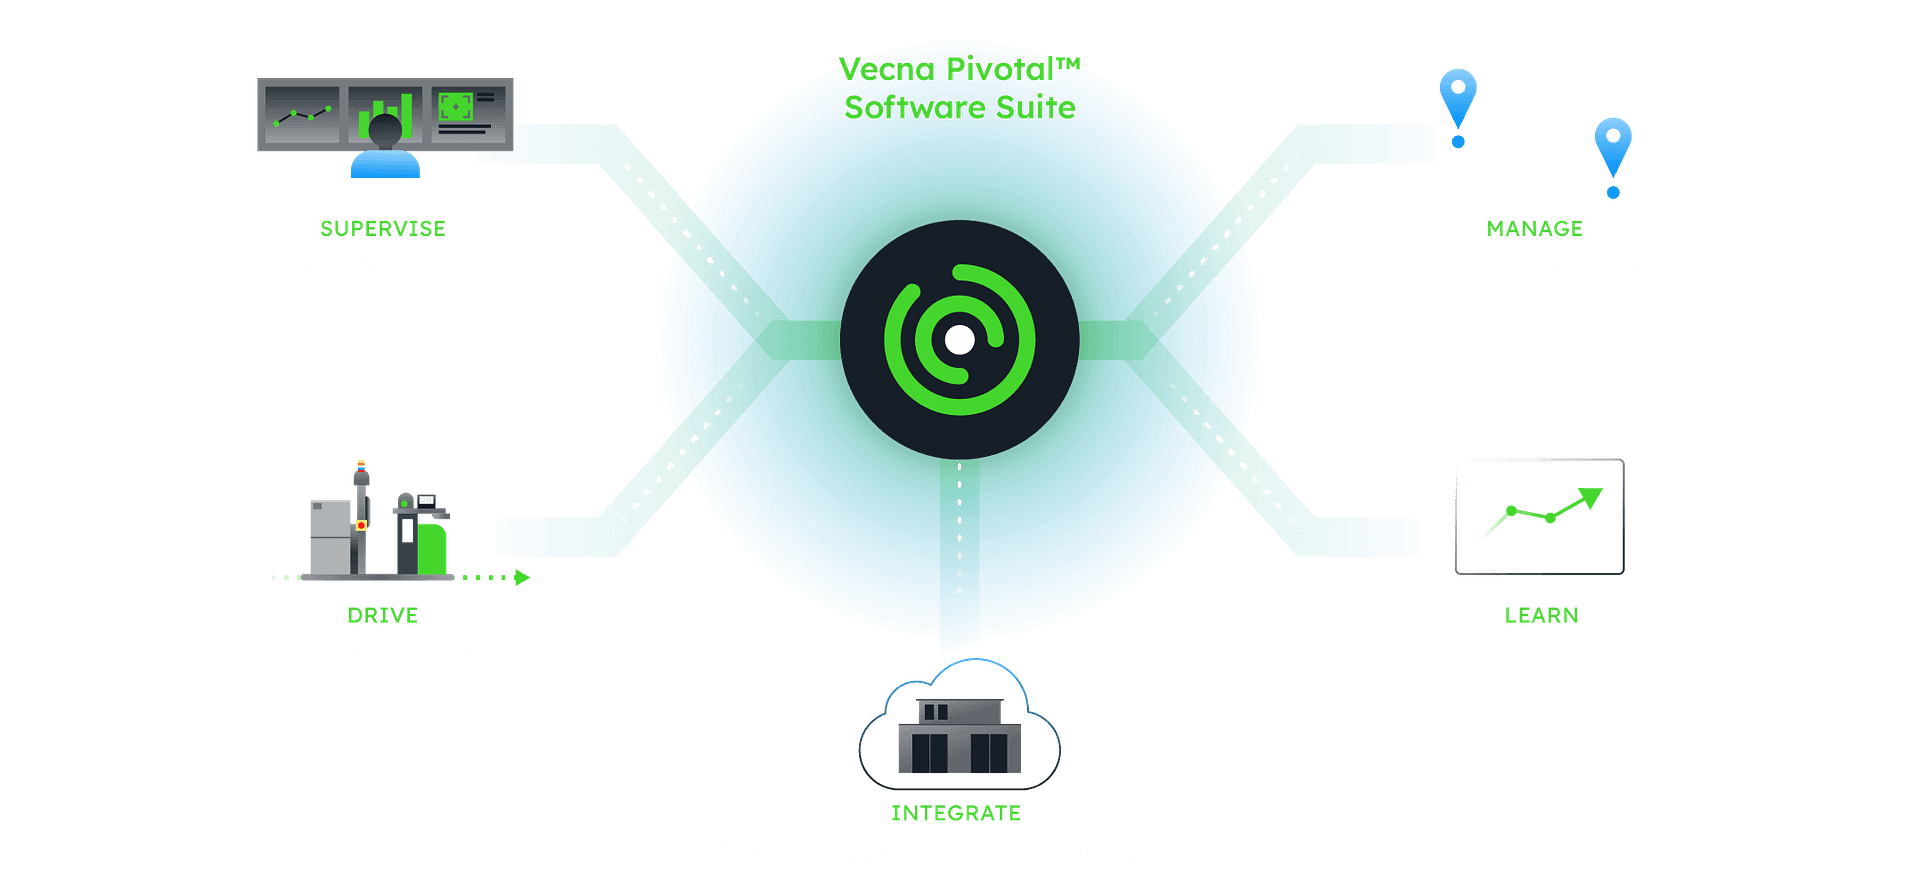 illustration of the Pivotal software suite